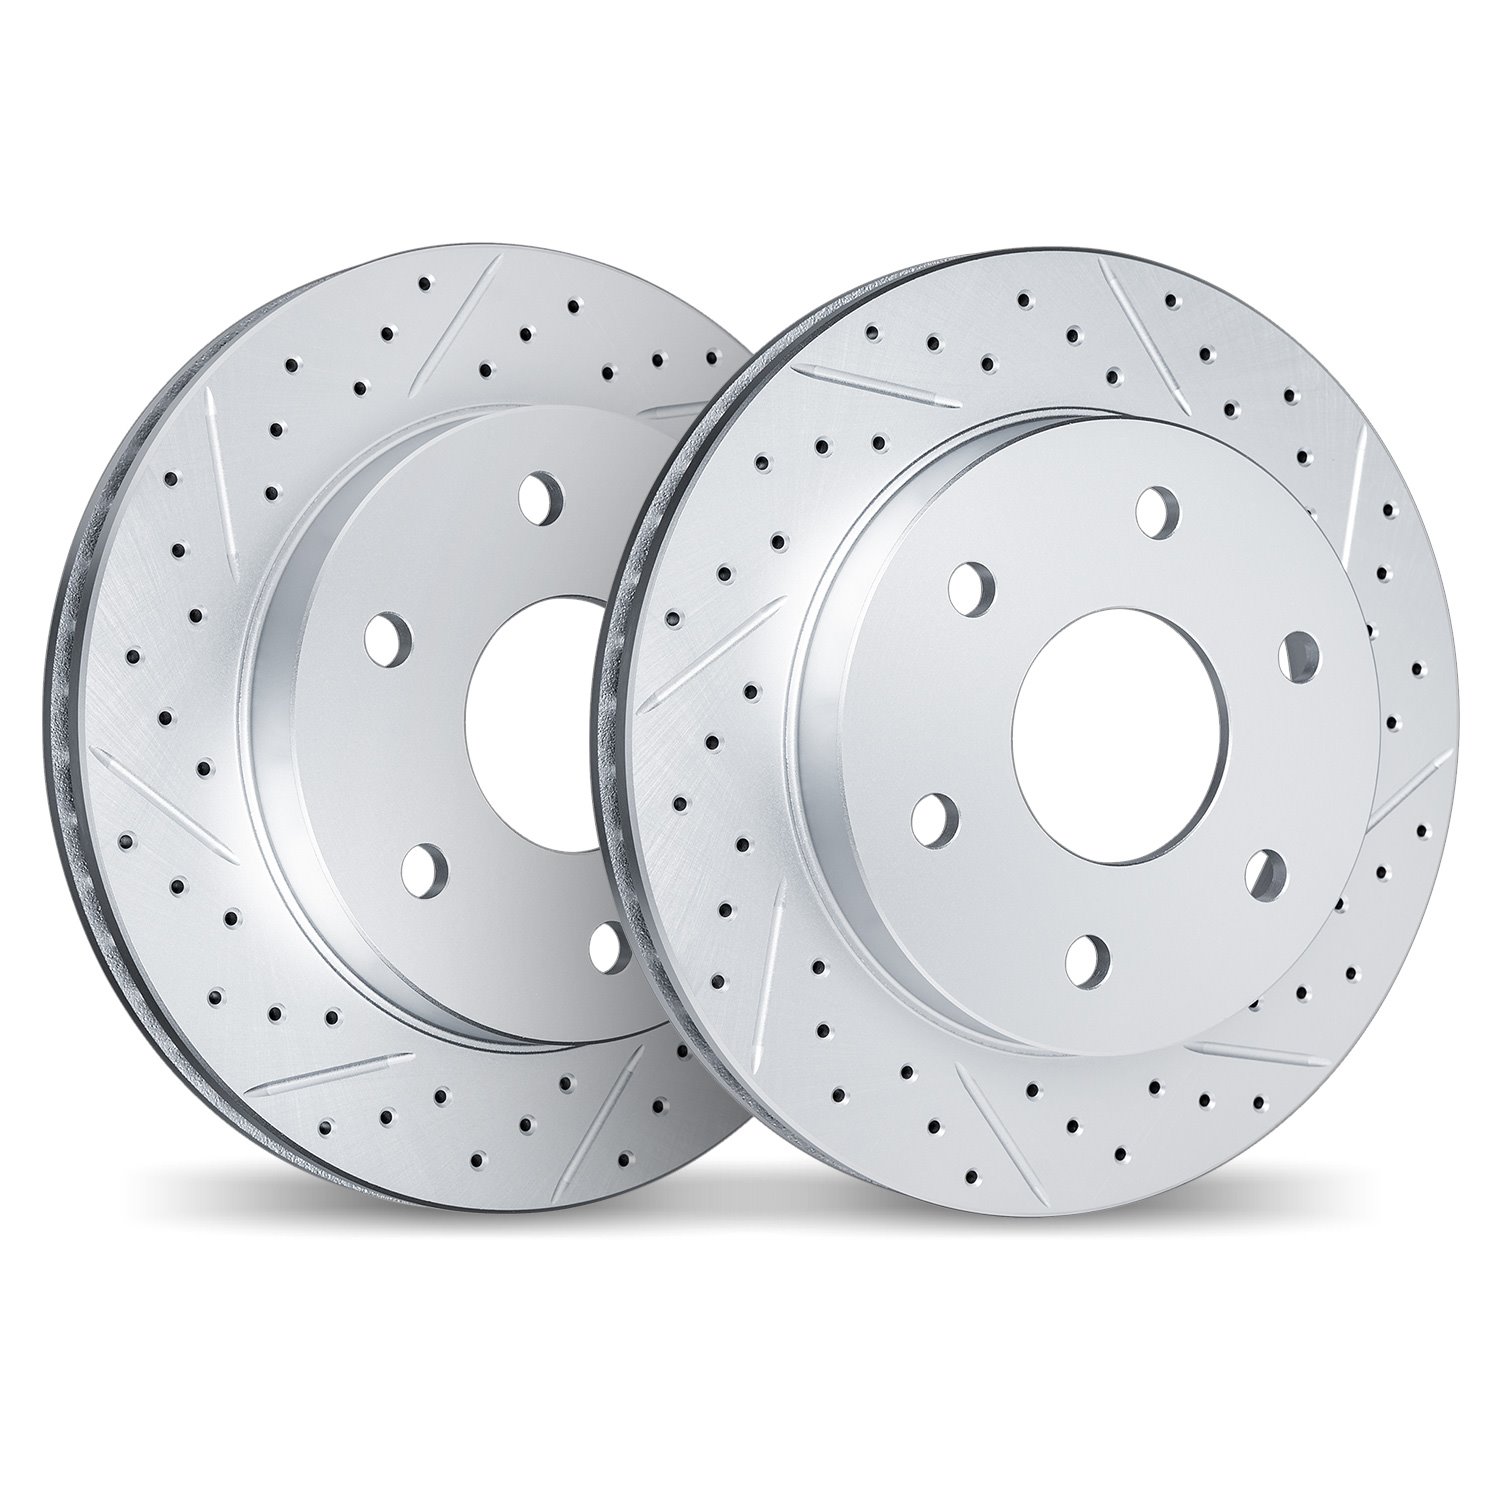 2002-54059 Geoperformance Drilled/Slotted Brake Rotors, 2004-2008 Ford/Lincoln/Mercury/Mazda, Position: Front